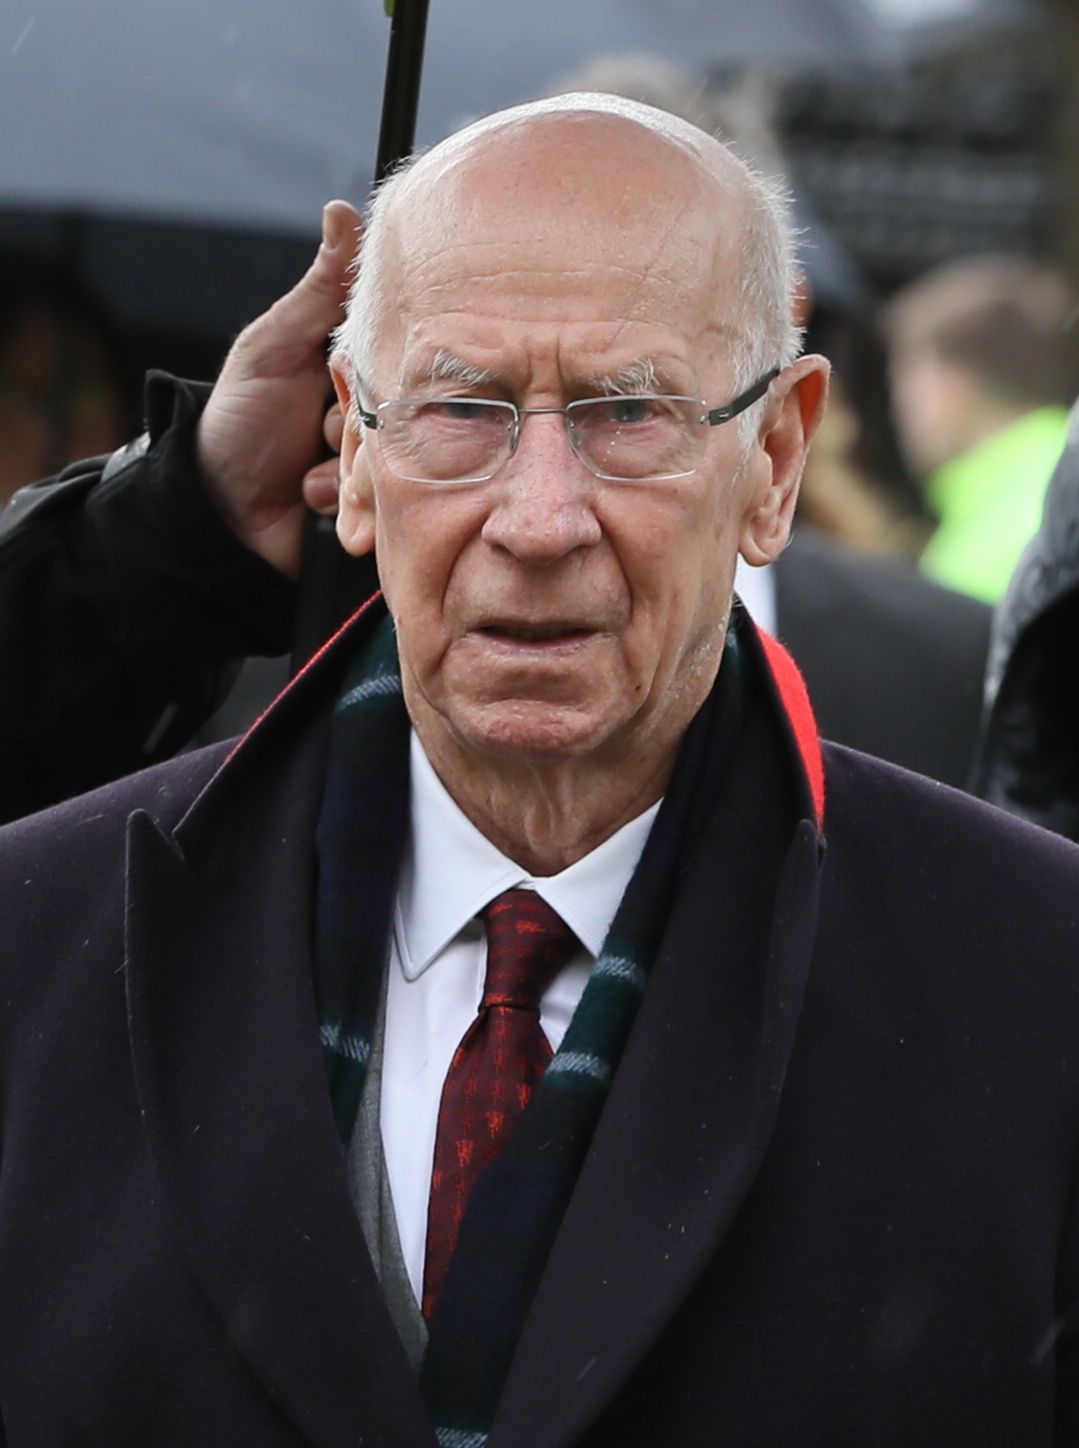 FILED - 01 November 2020, Northern Ireland, Coelraine: Sir Bobby Charlton attends the funeral of former Northern Irish footballer Harry Gregg. Sir Charlton, the 1966 World Cup winner, has been diagnosed with dementia, his wife Norma confirmed in an interview published on Sunday. Photo: Brian Lawless/PA Wire/dpa